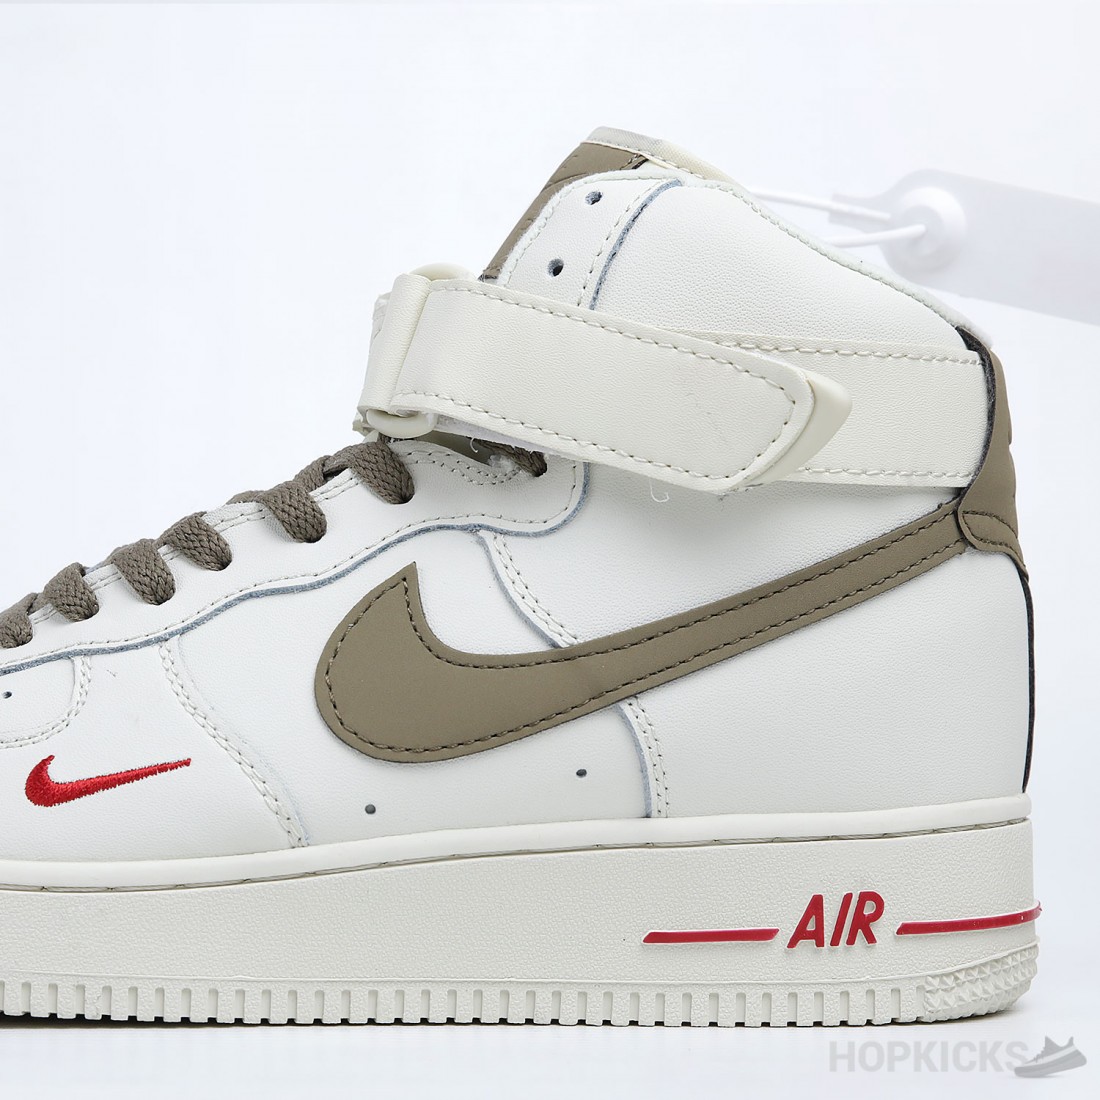 Buy Online Air Force 1 ID White Light Brown Red in Pakistan | Air Force 1 High ID White Light Brown Red Prices in Pakistan